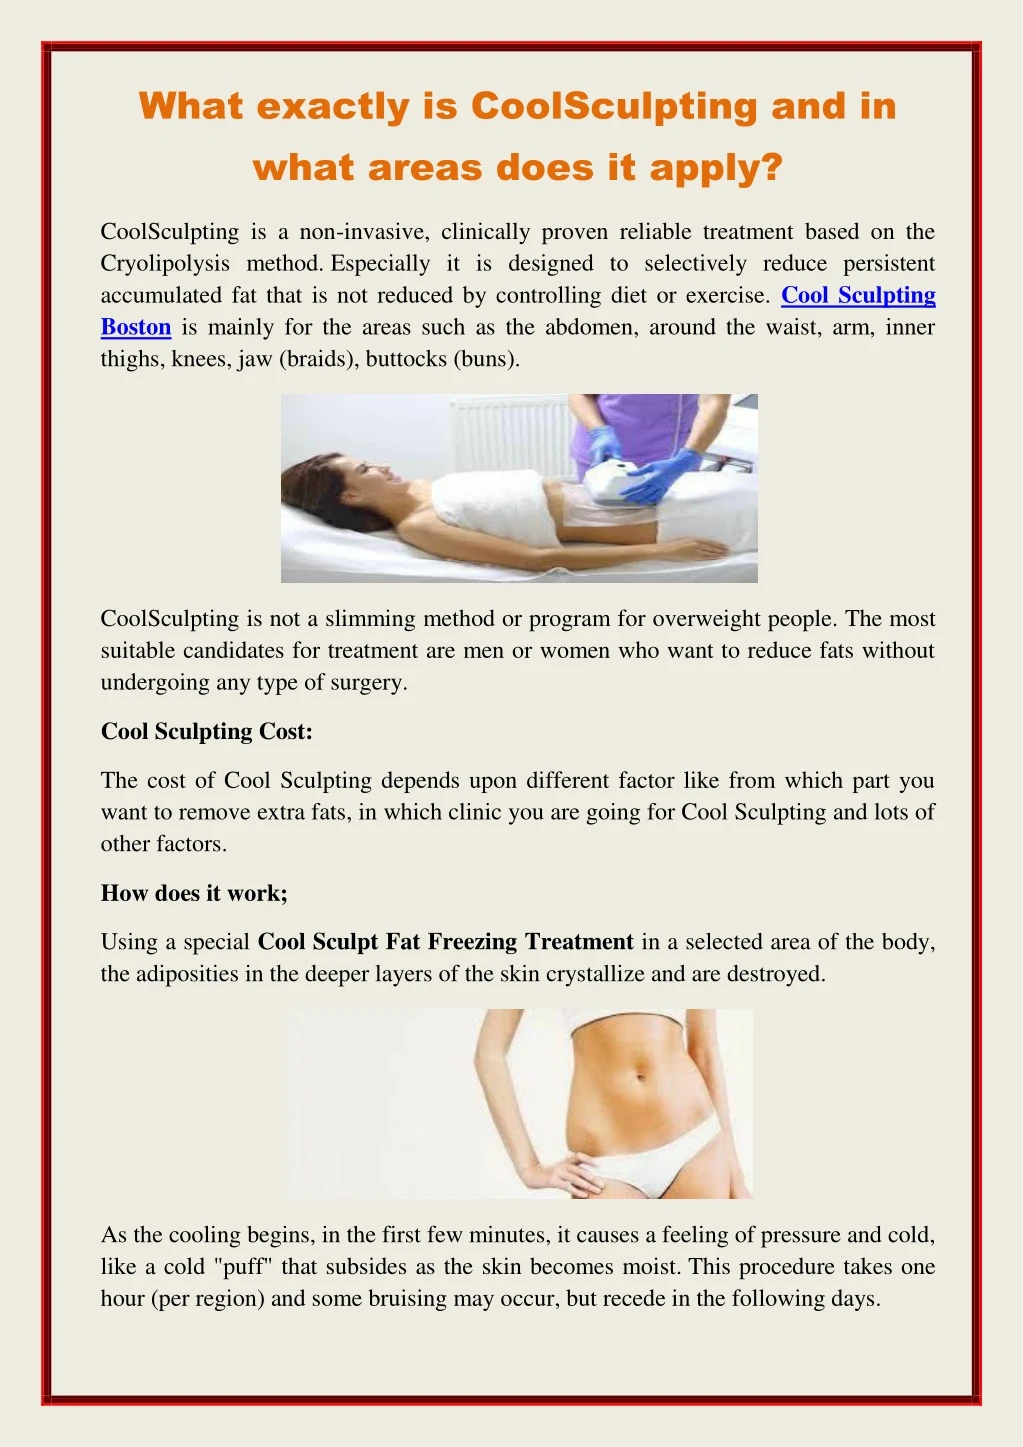 what exactly is coolsculpting and in what areas